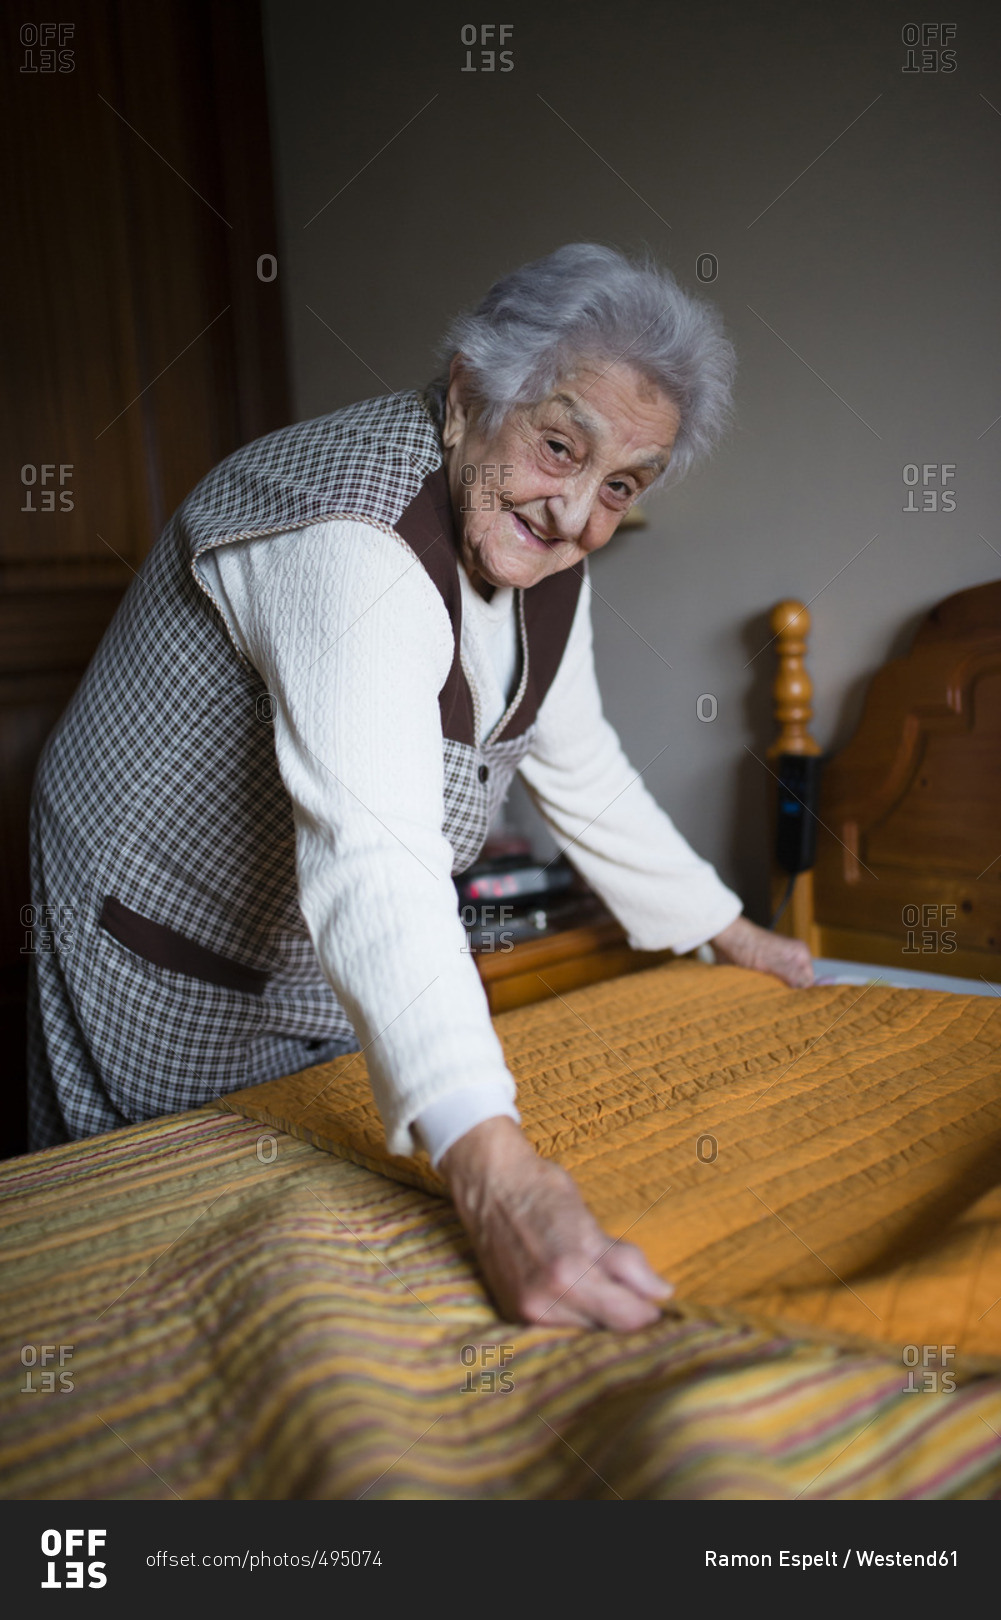 Senior woman putting fresh sheets on a bed